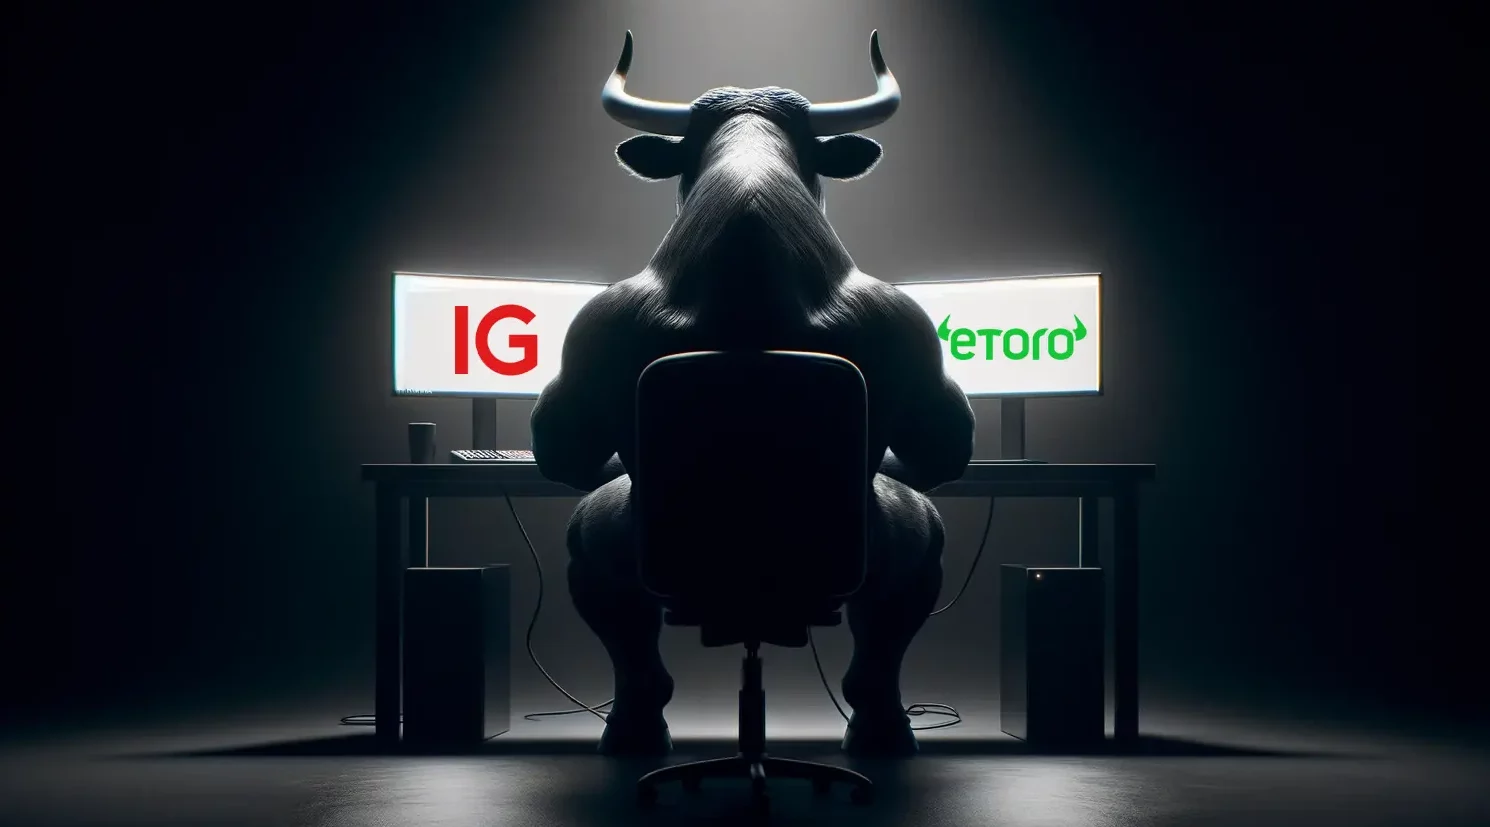 Dramatic image of a bull seated at a desk between two monitors displaying 'IG' and 'eToro' logos, illustrating the competition between eToro vs IG in trading platforms.